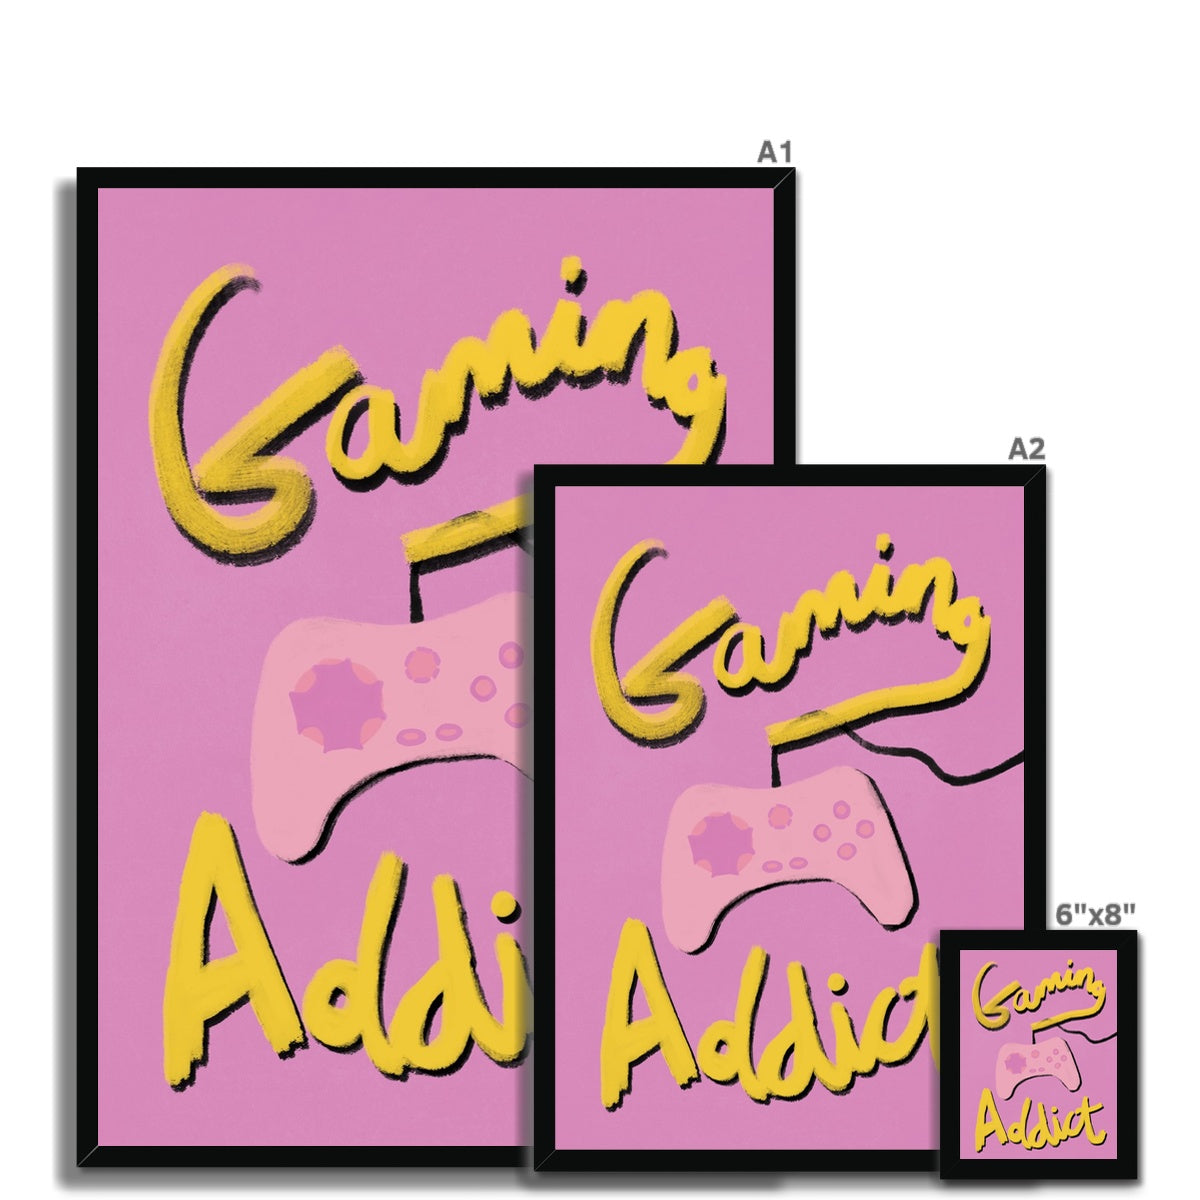 Gaming Addict - Pink, Yellow Framed Print